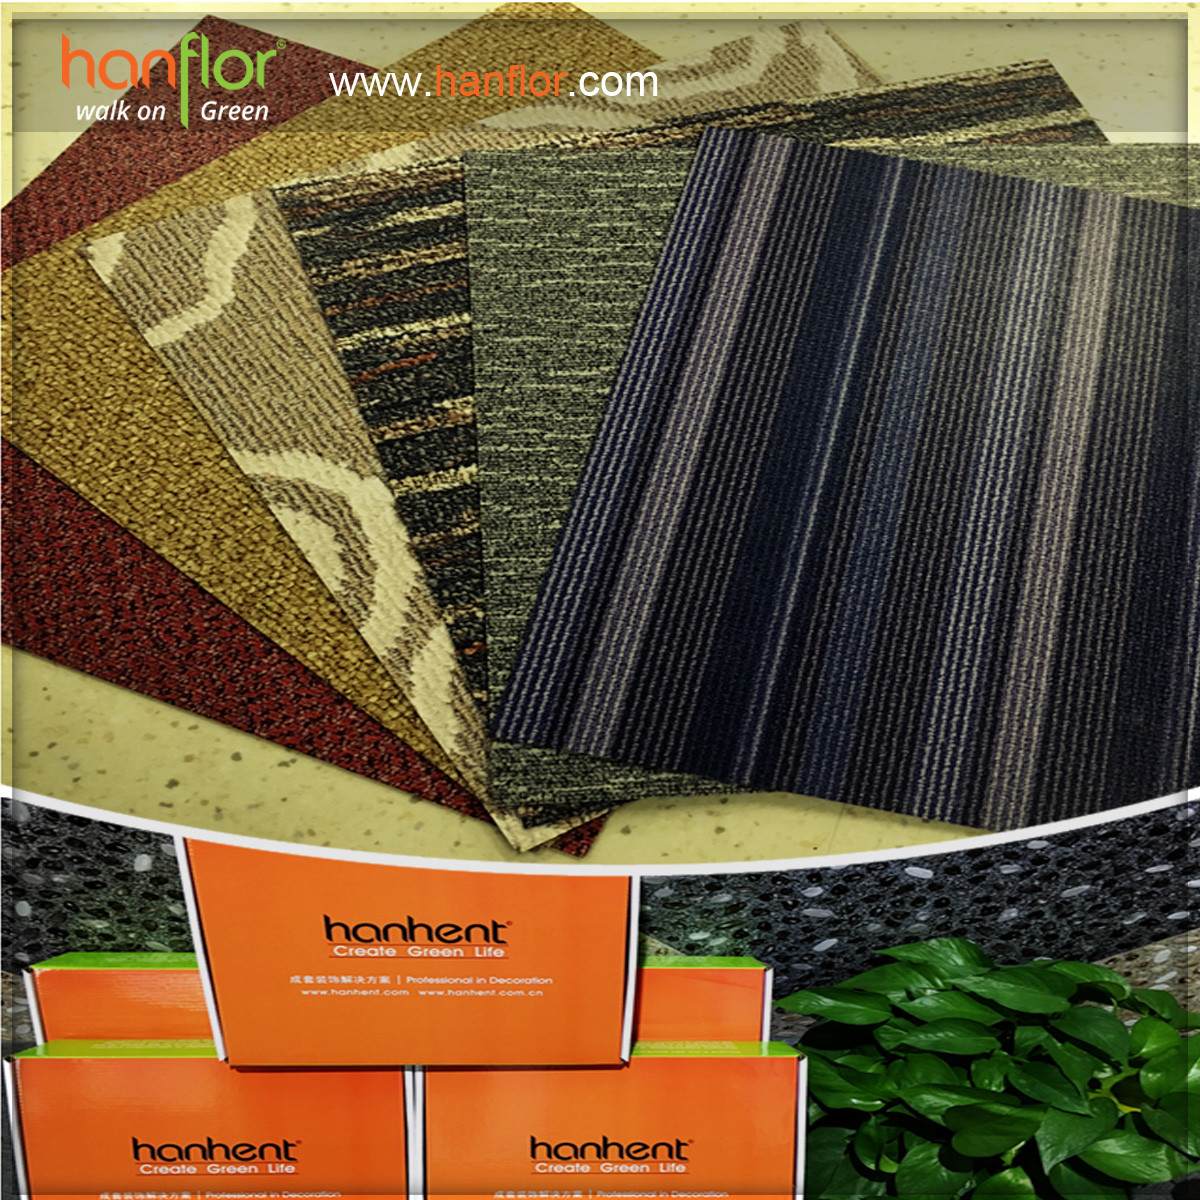 Free samples:Hanhent hanflor with free samples for you, free samples of pvc flooring we will arrange for you as your requirements. plastic floor,pvc floor, Vinyl floor, plastic flooring, pvc flooring, Vinyl flooring, pvc plank, vinyl plank, pvc tile, vinyl tile, click vinyl flooring, interlocking vinyl flooring, unilin click flooring, unilin click vinyl flooring, click pvc flooring, interlocking pvc flooring, unilin click vinyl flooring, unilin click pvc flooring